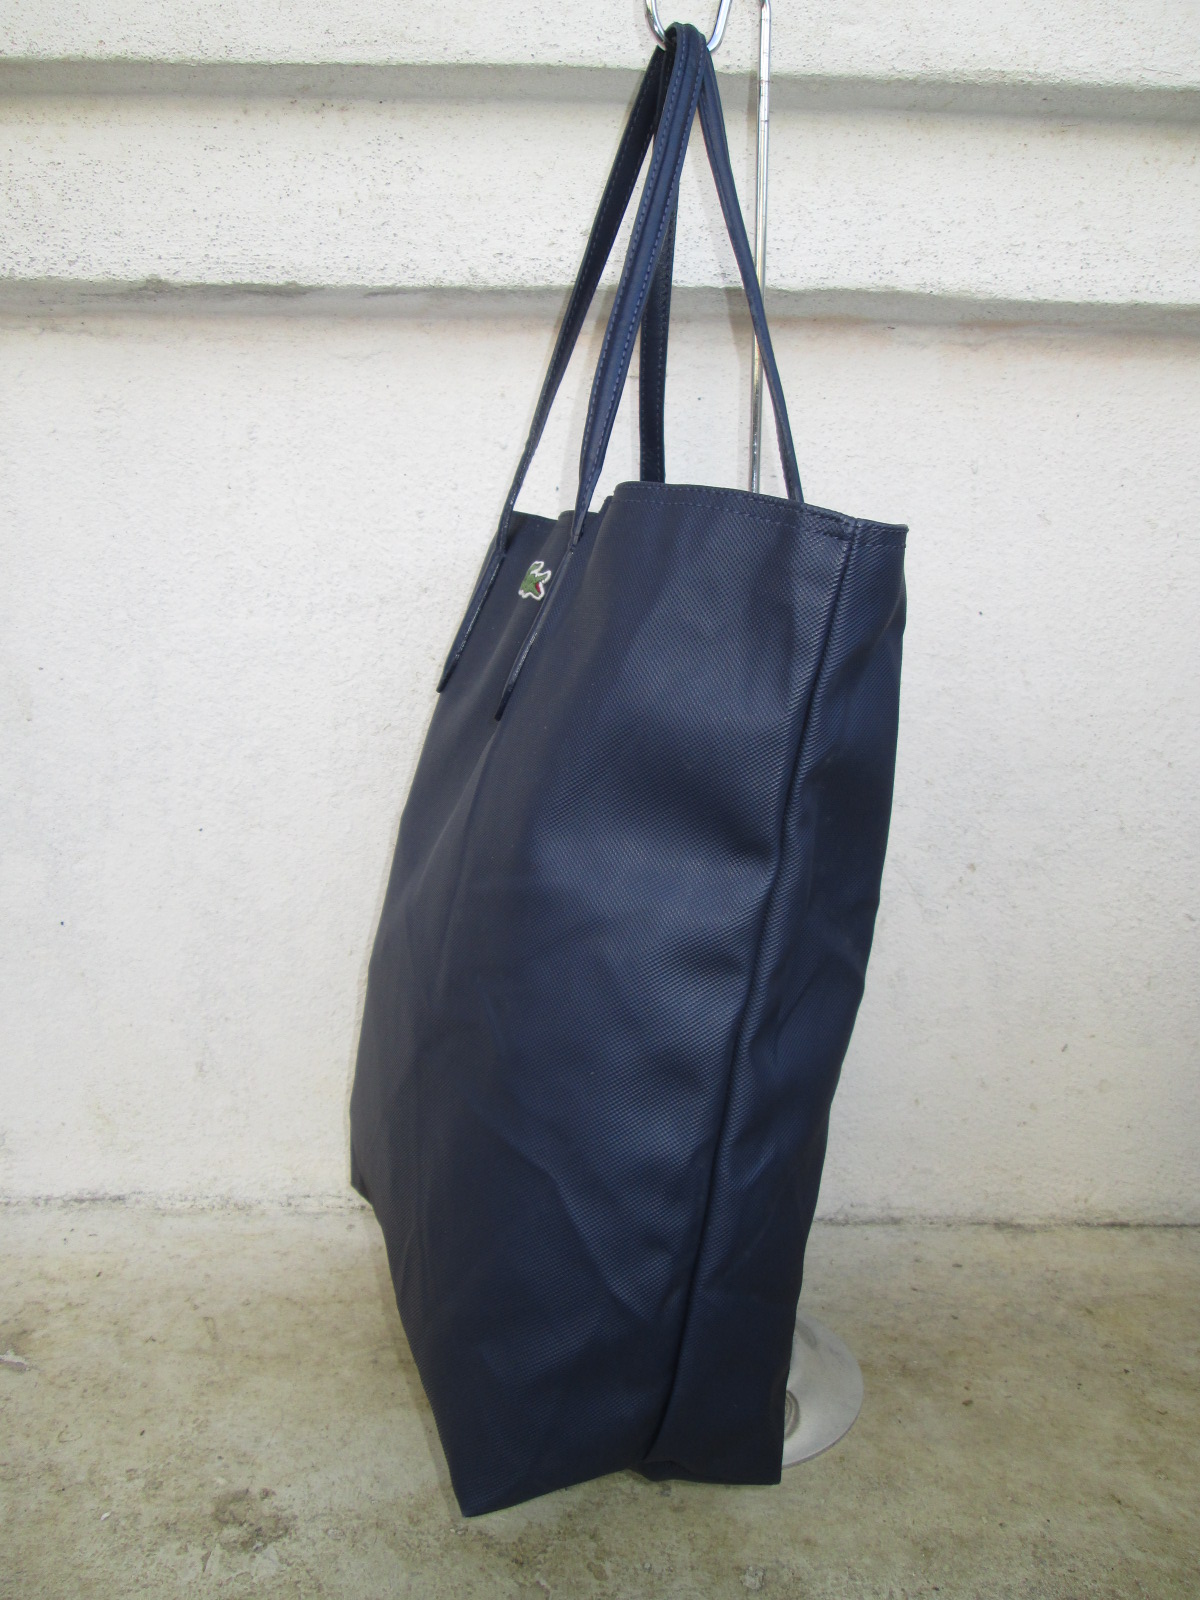 d0rayakEEbaG: Authentic LACOSTE Dark Blue Tote Bag(SOLD)